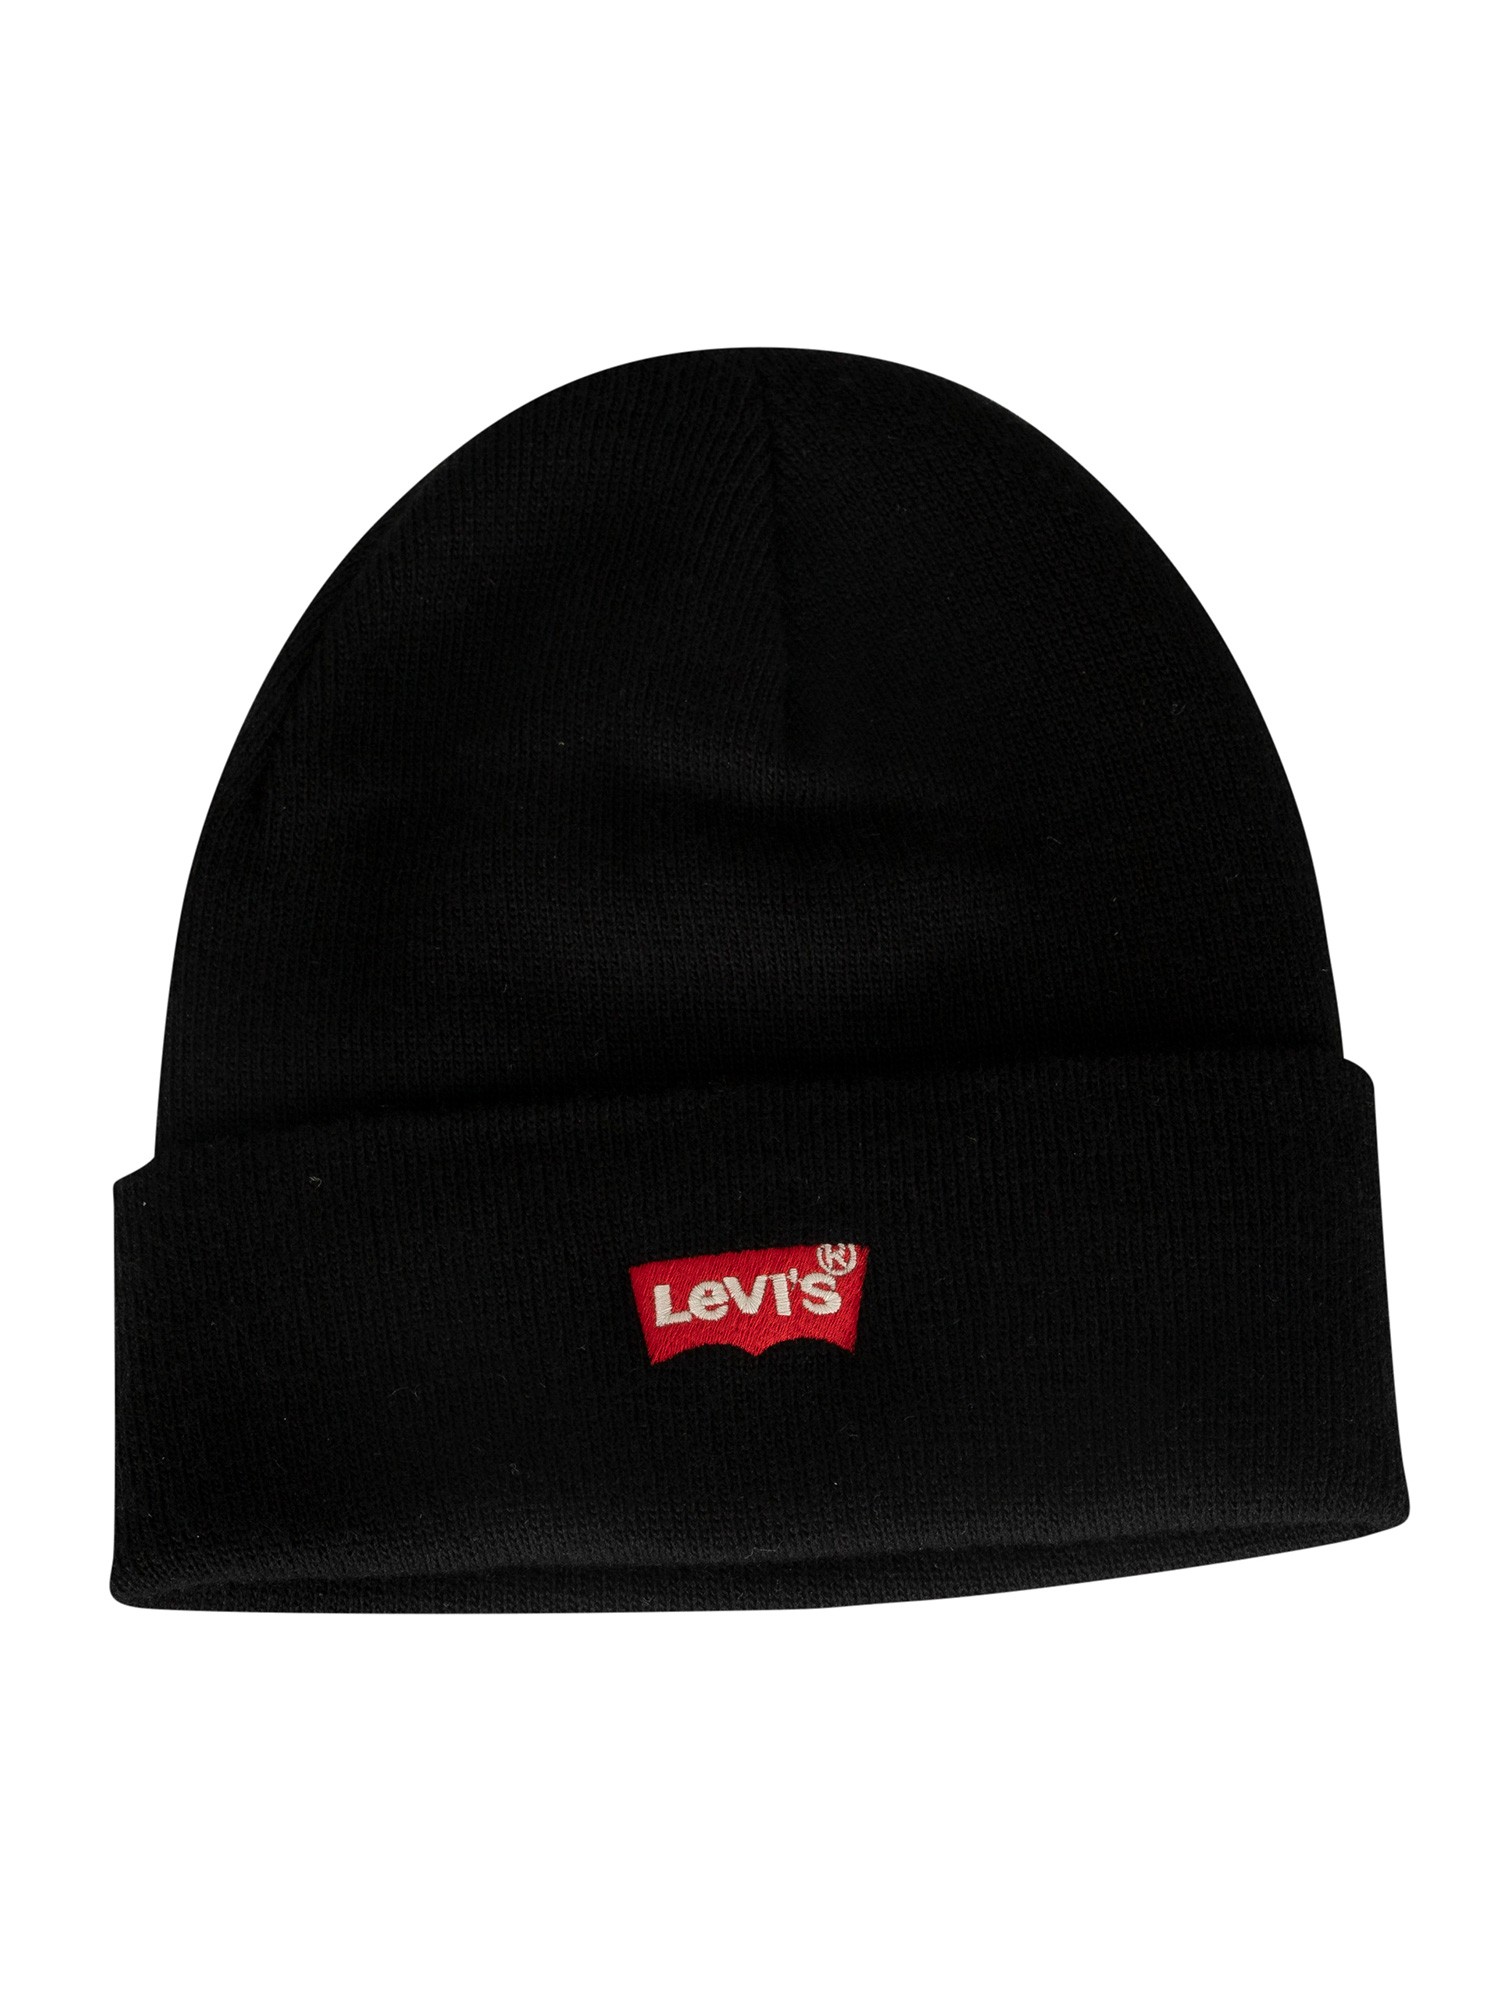 Шапка бини унисекс Levi's Red Batwing Embroidered Slouchy Beanie черная, one size